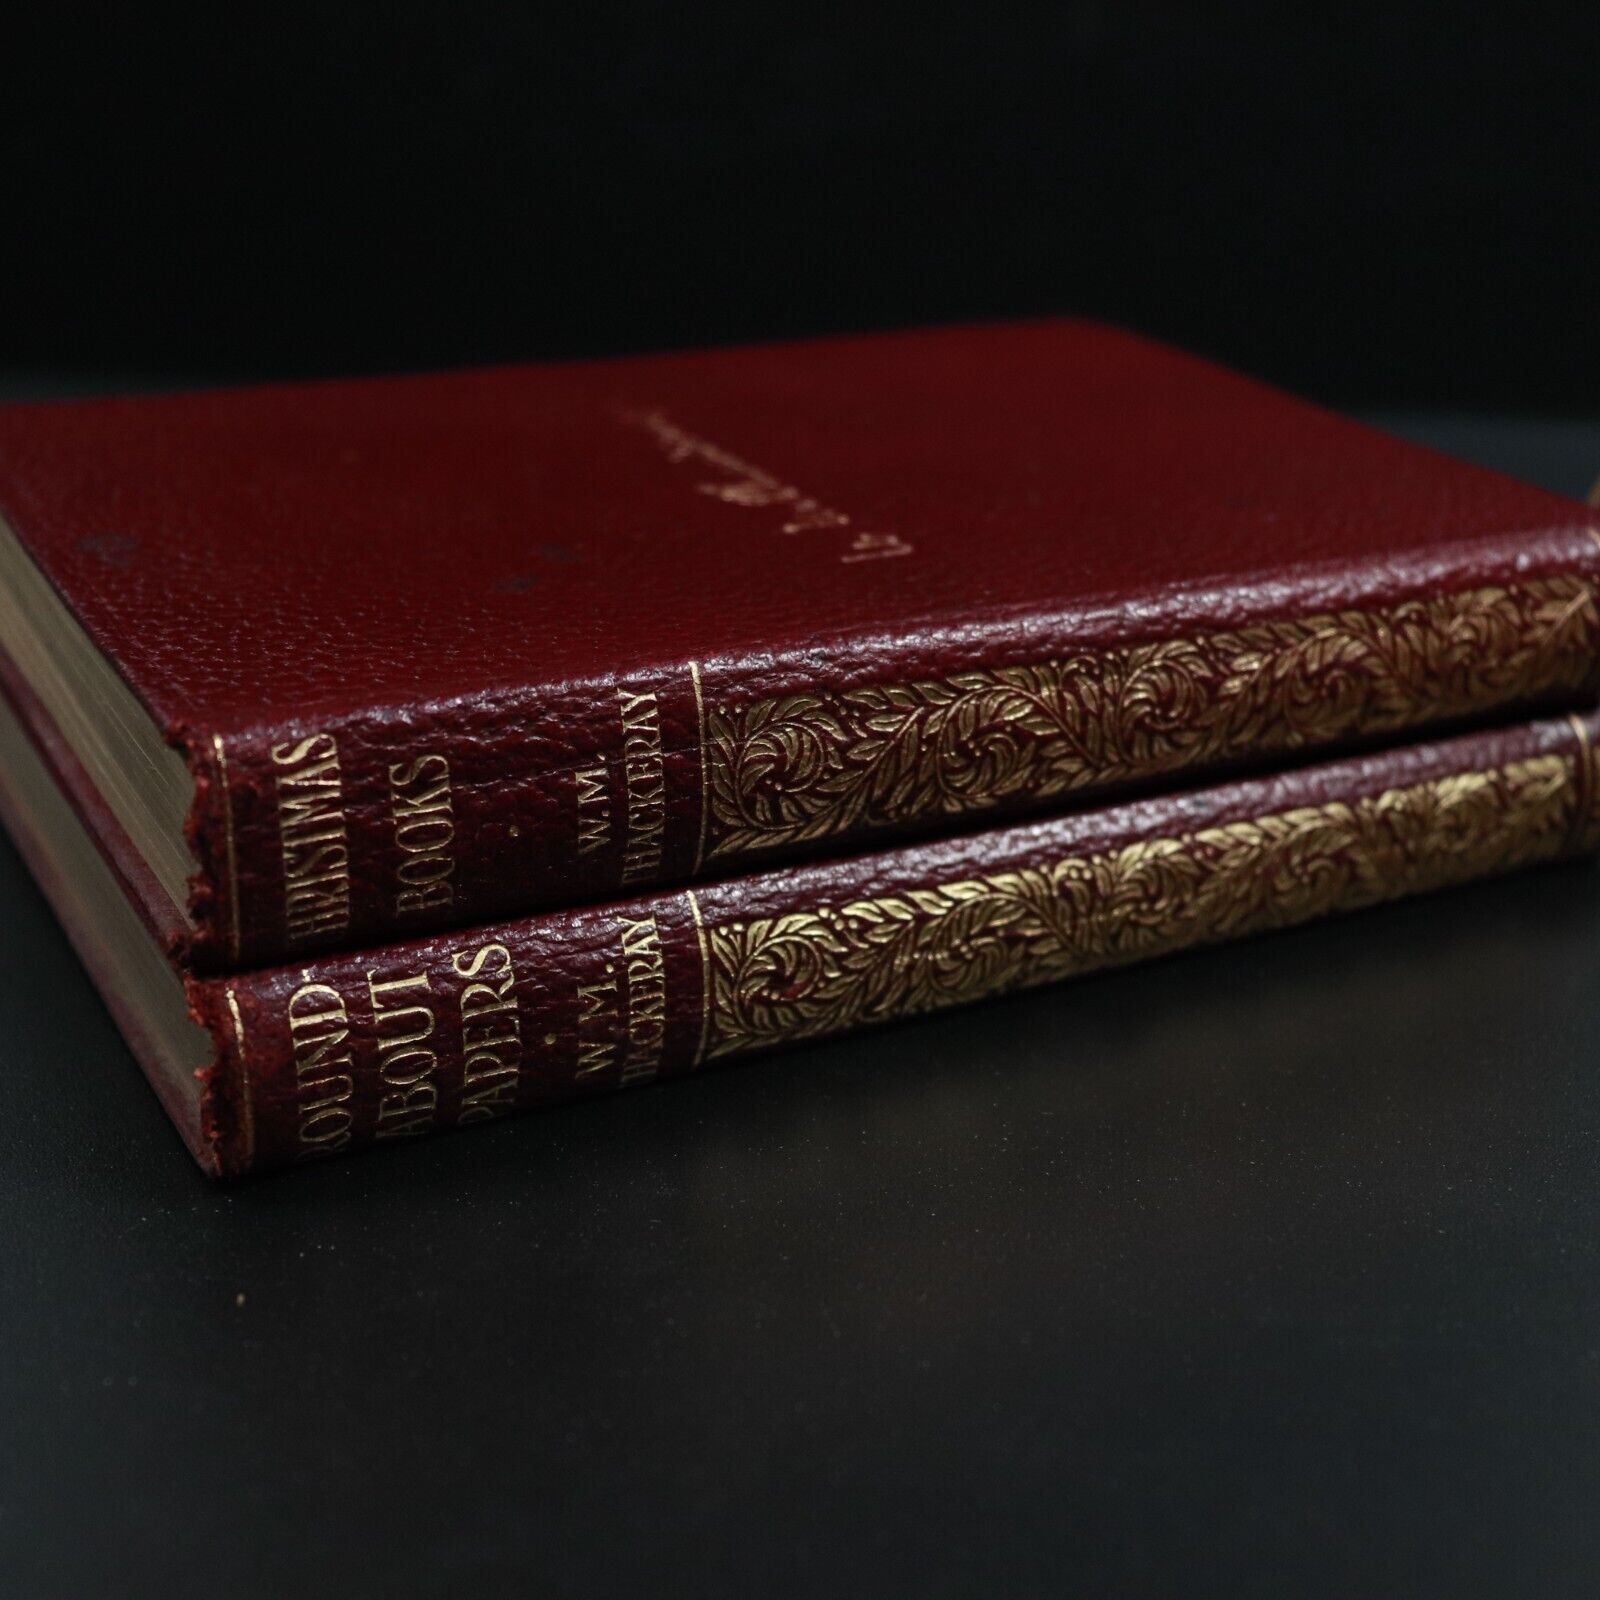 c1910 2vol Christmas Books & Round About Papers by W.M. Thackeray Antique Books